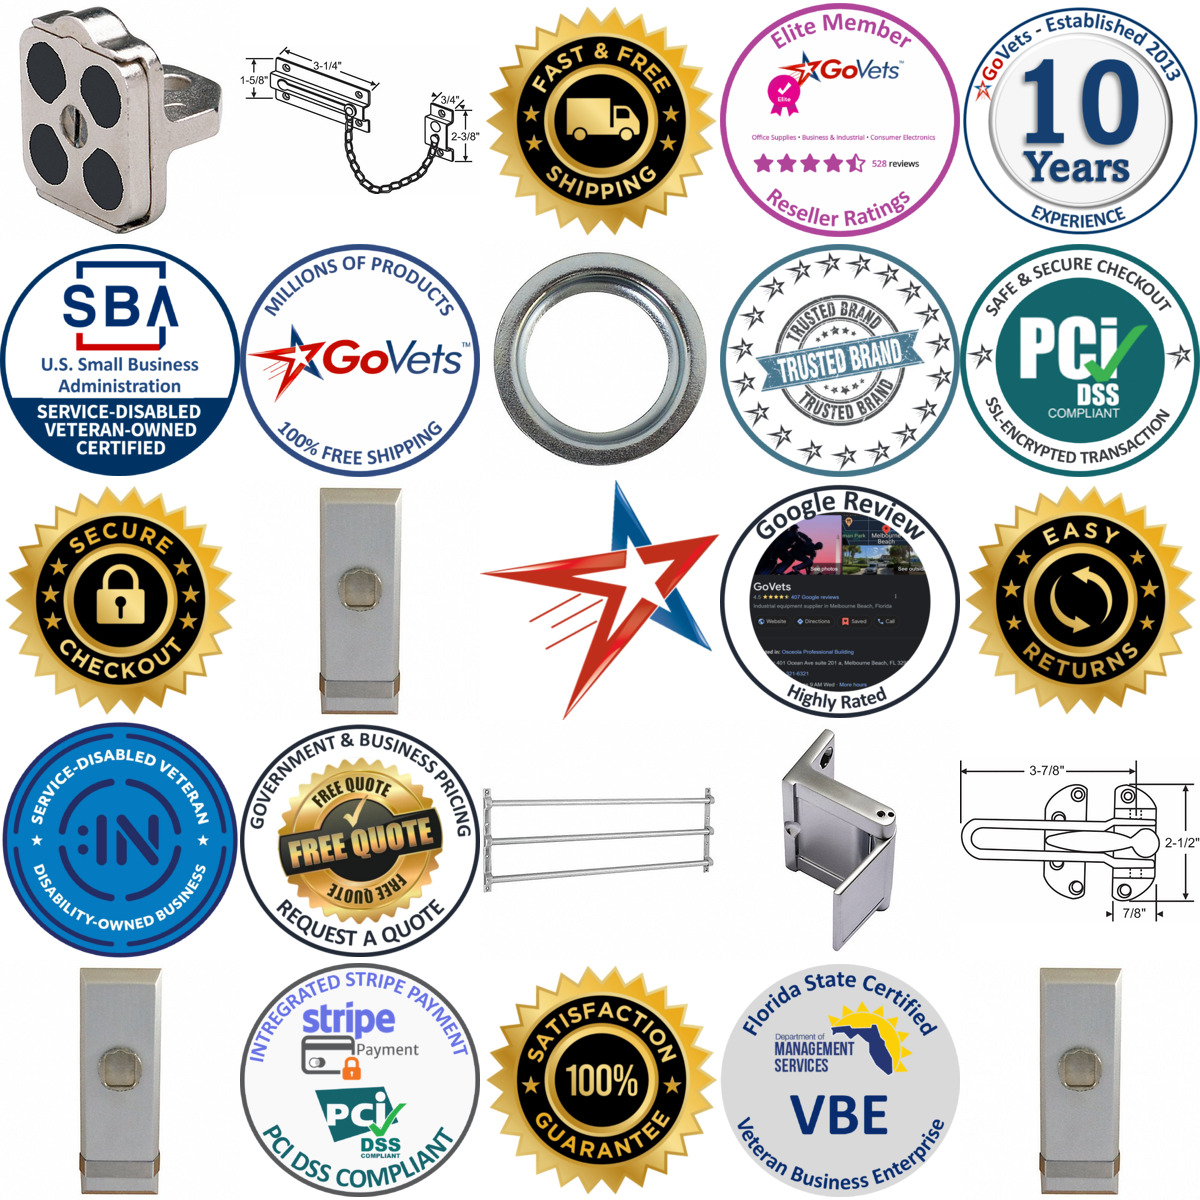 A selection of Door Guards products on GoVets